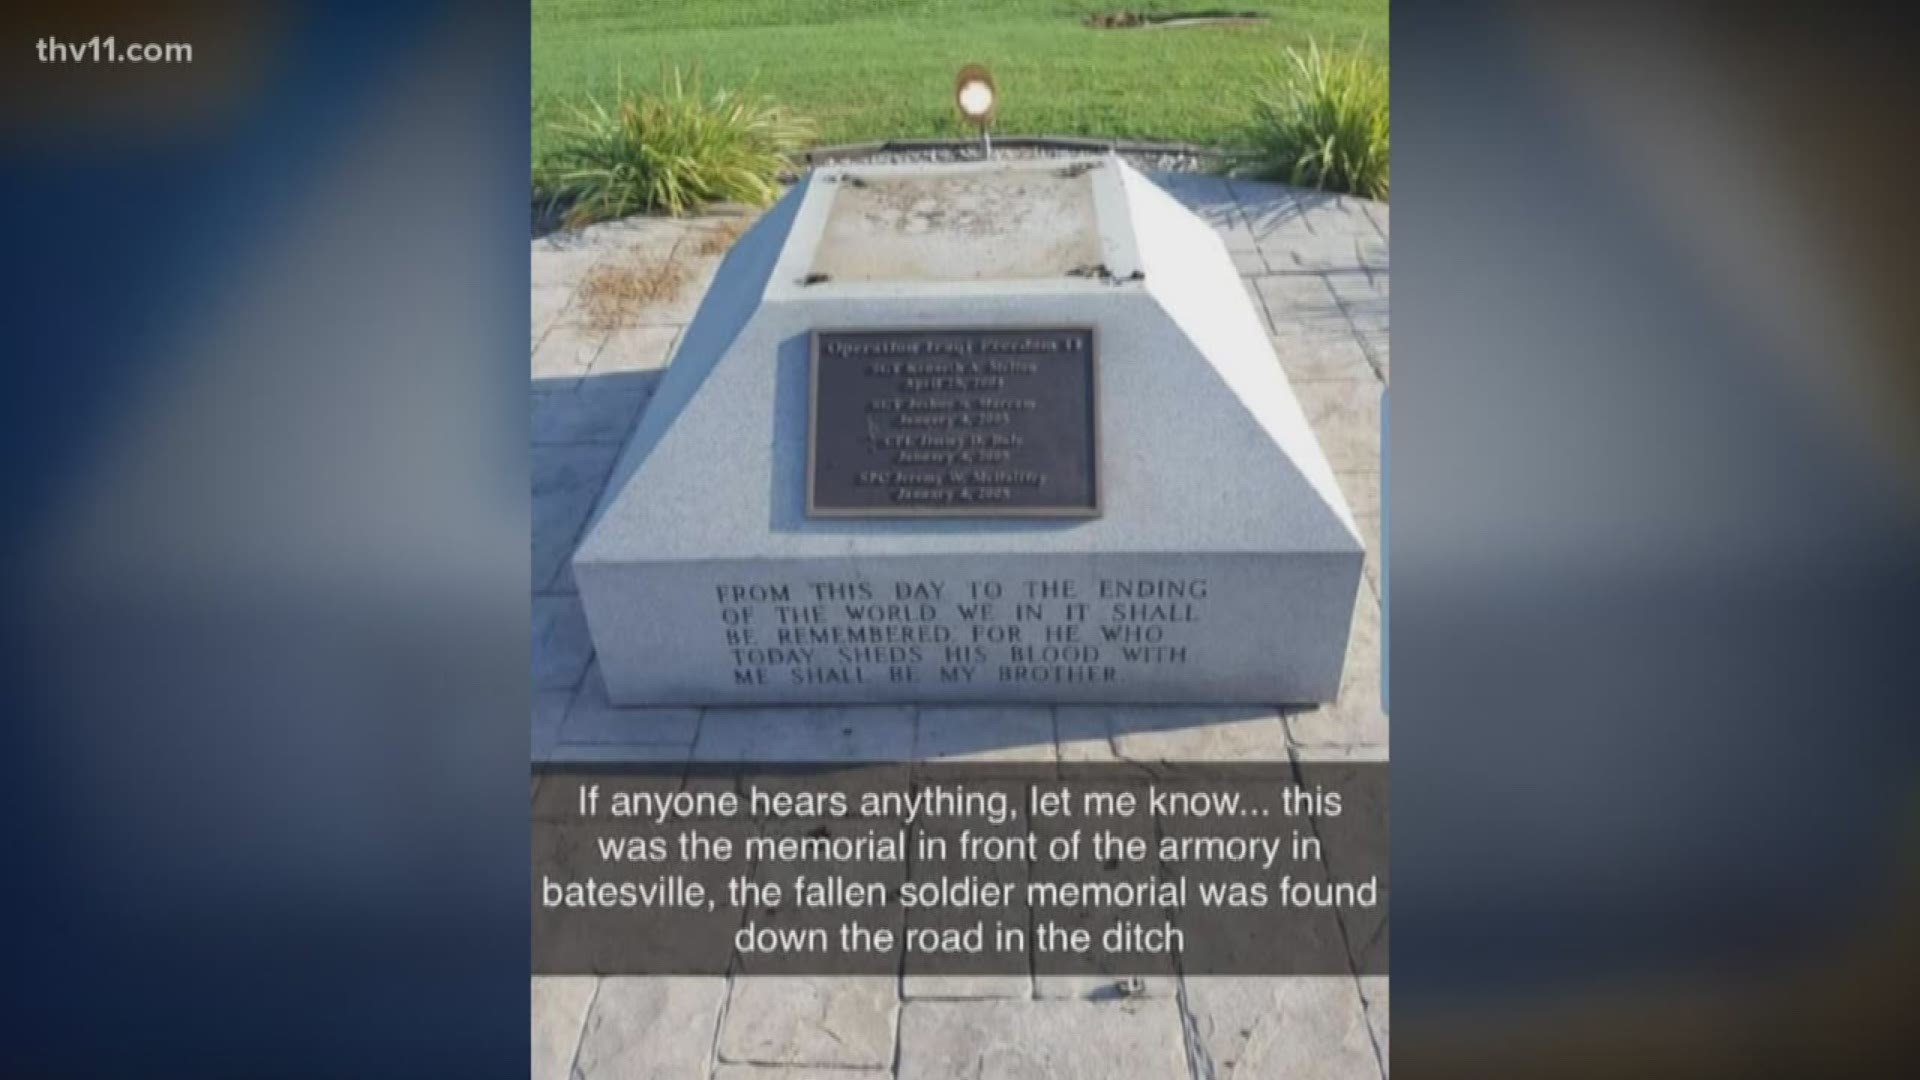 The Arkansas National Guard says the outpouring support from the community has been amazing after vandals destroyed a memorial to fallen soldiers.